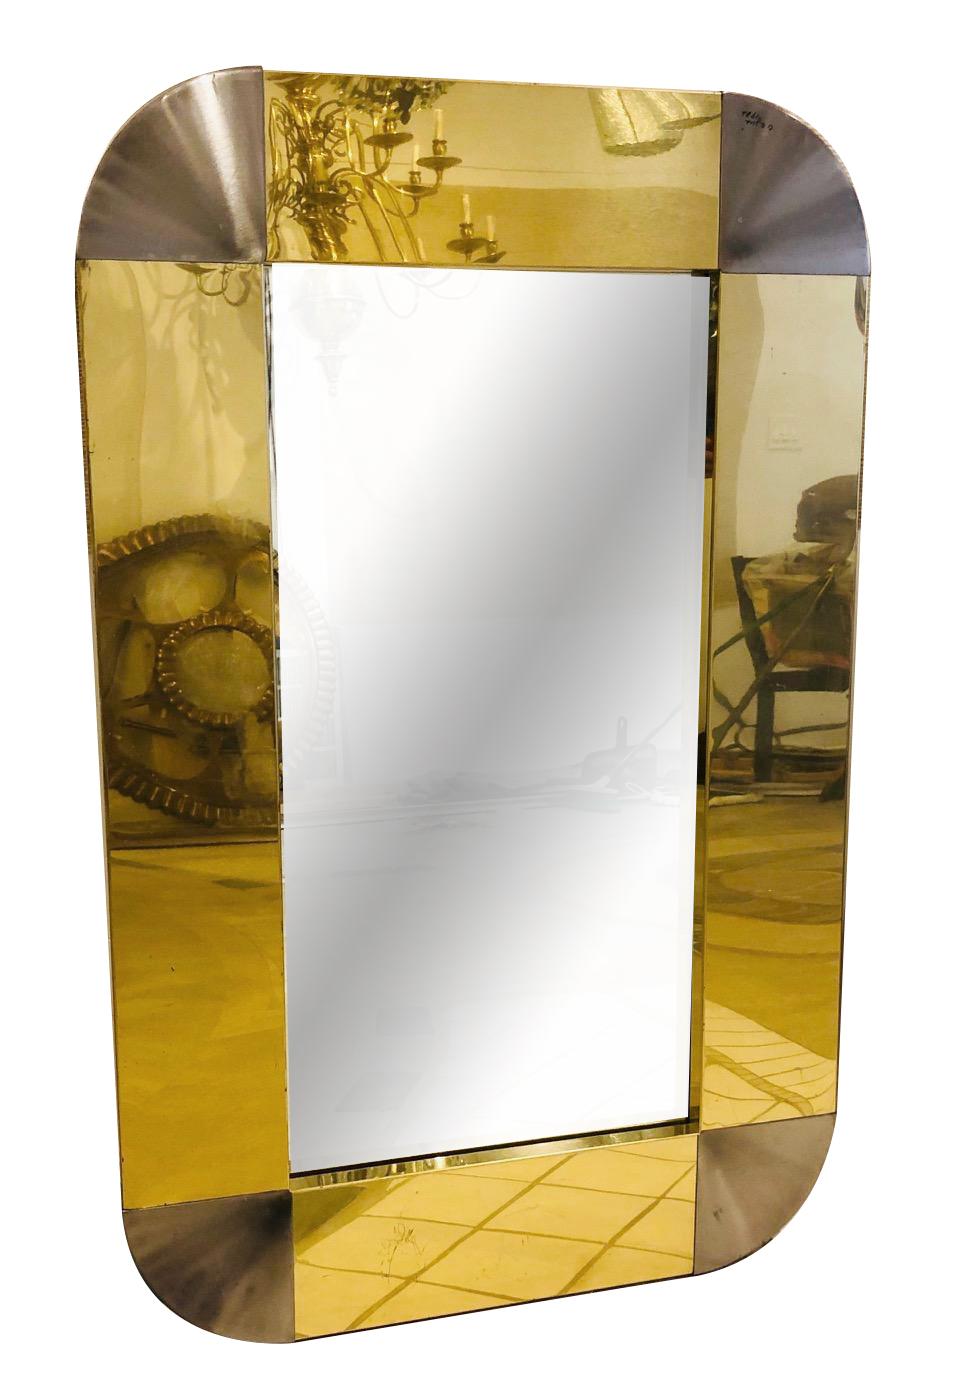 Pair of C. Jere' 1983 polished brass and silvered metal frame mirrors. Sold as pair.

Measurements:
Height: 44
Width: 28